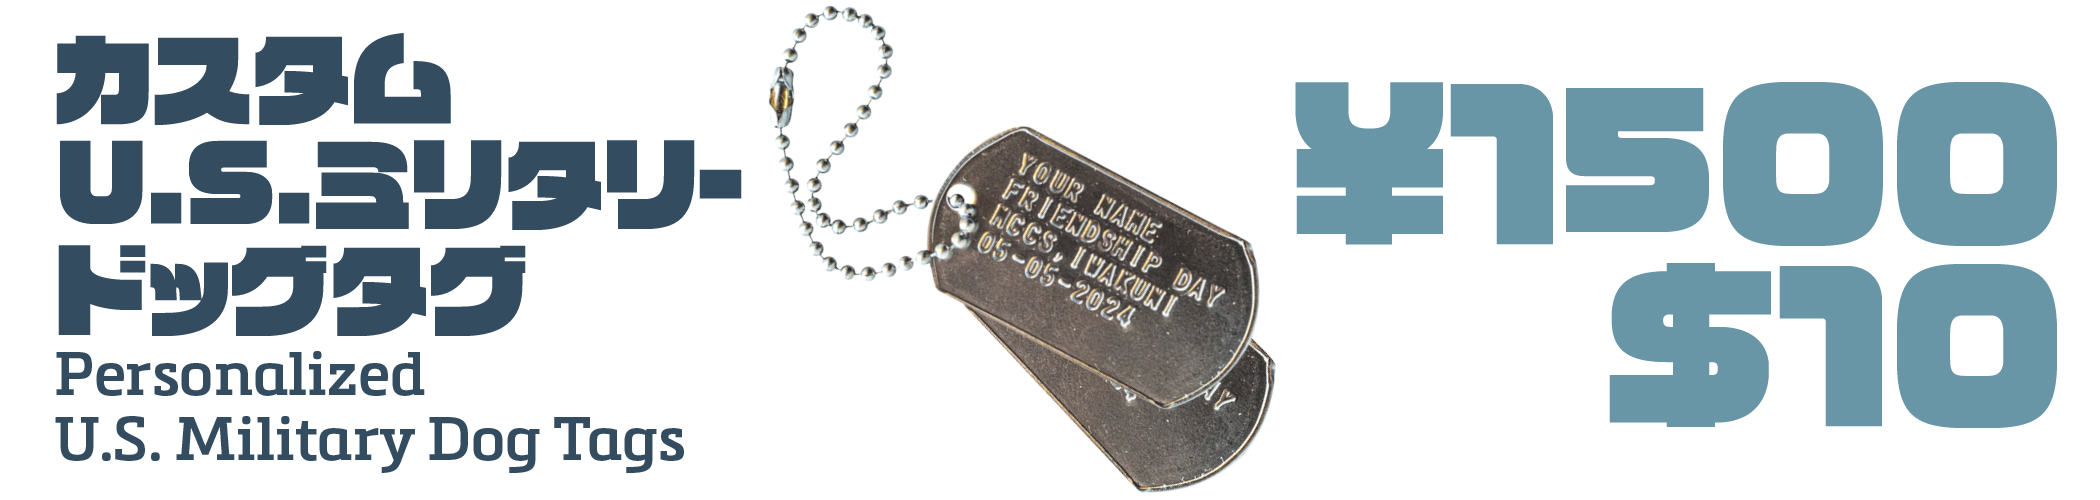 Personalized U.S. Military Dog Tags for $10 |　カスタムU.S.ミリタリードッグタグー ¥1500